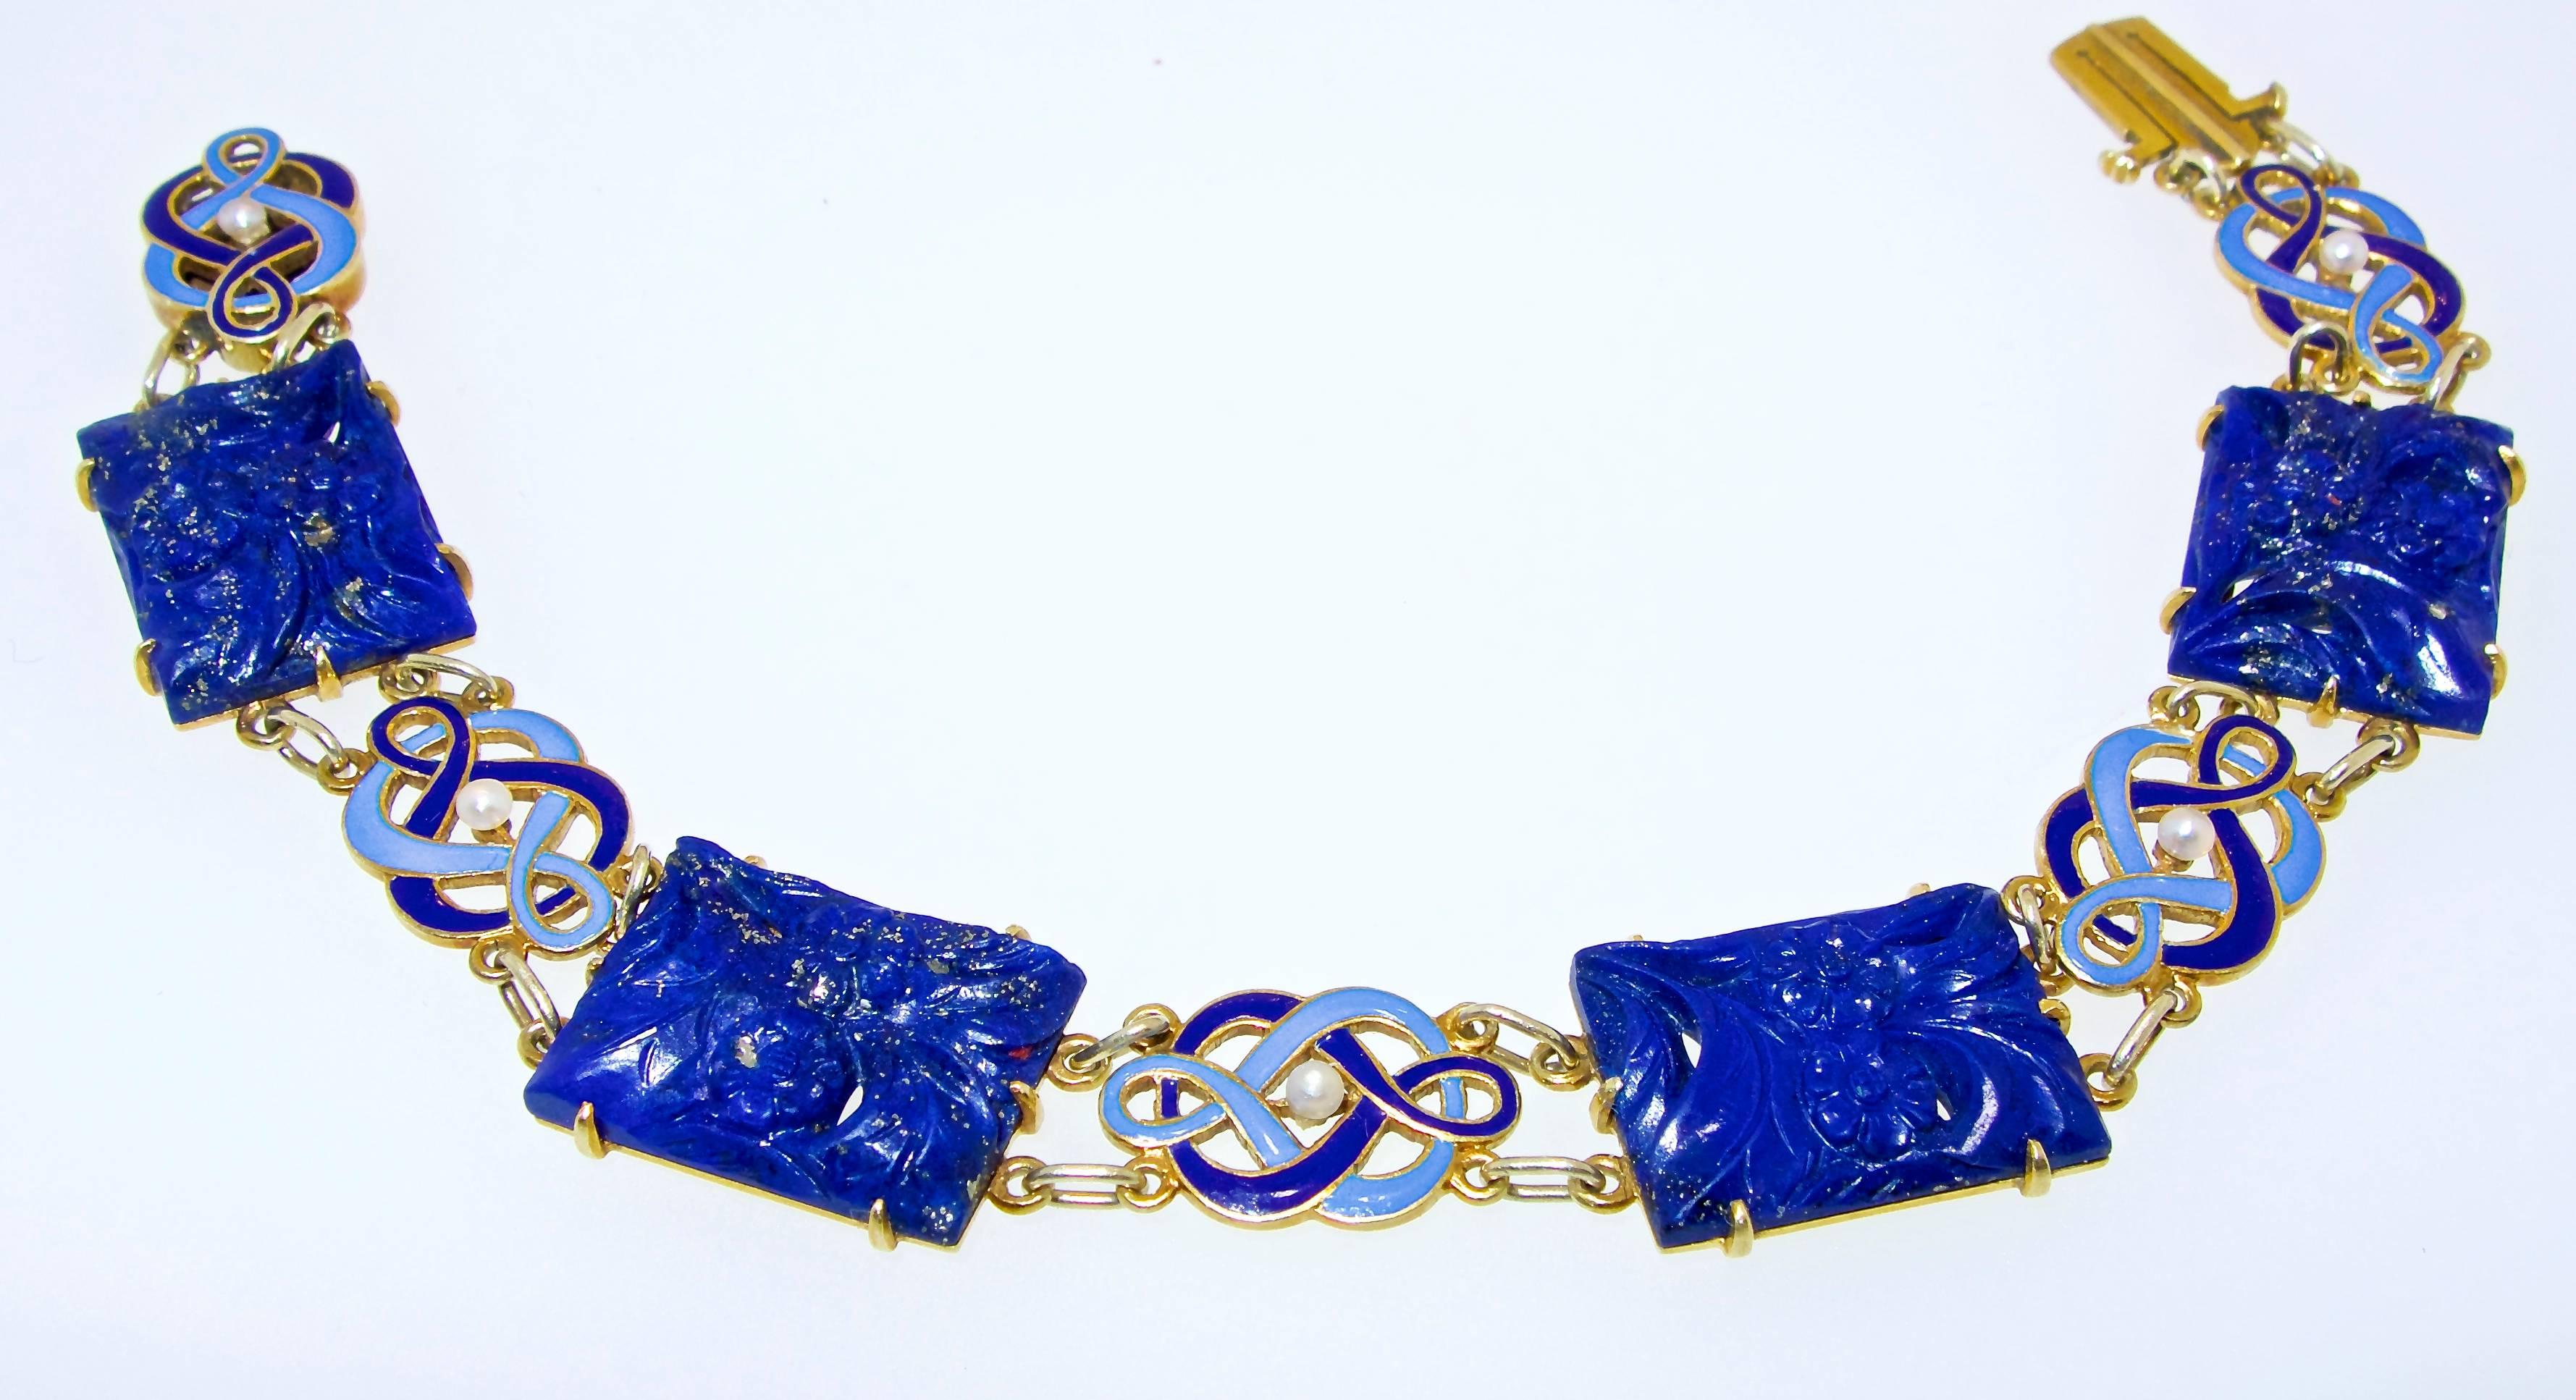 Cartier early Art Deco with carved lapis, two colors of blue enamel centering fine small natural pearls.  This link bracelet is signed and numbered on the verso of the clasp.  7.25 inches long.

Foremost in the acquisition and sale of important